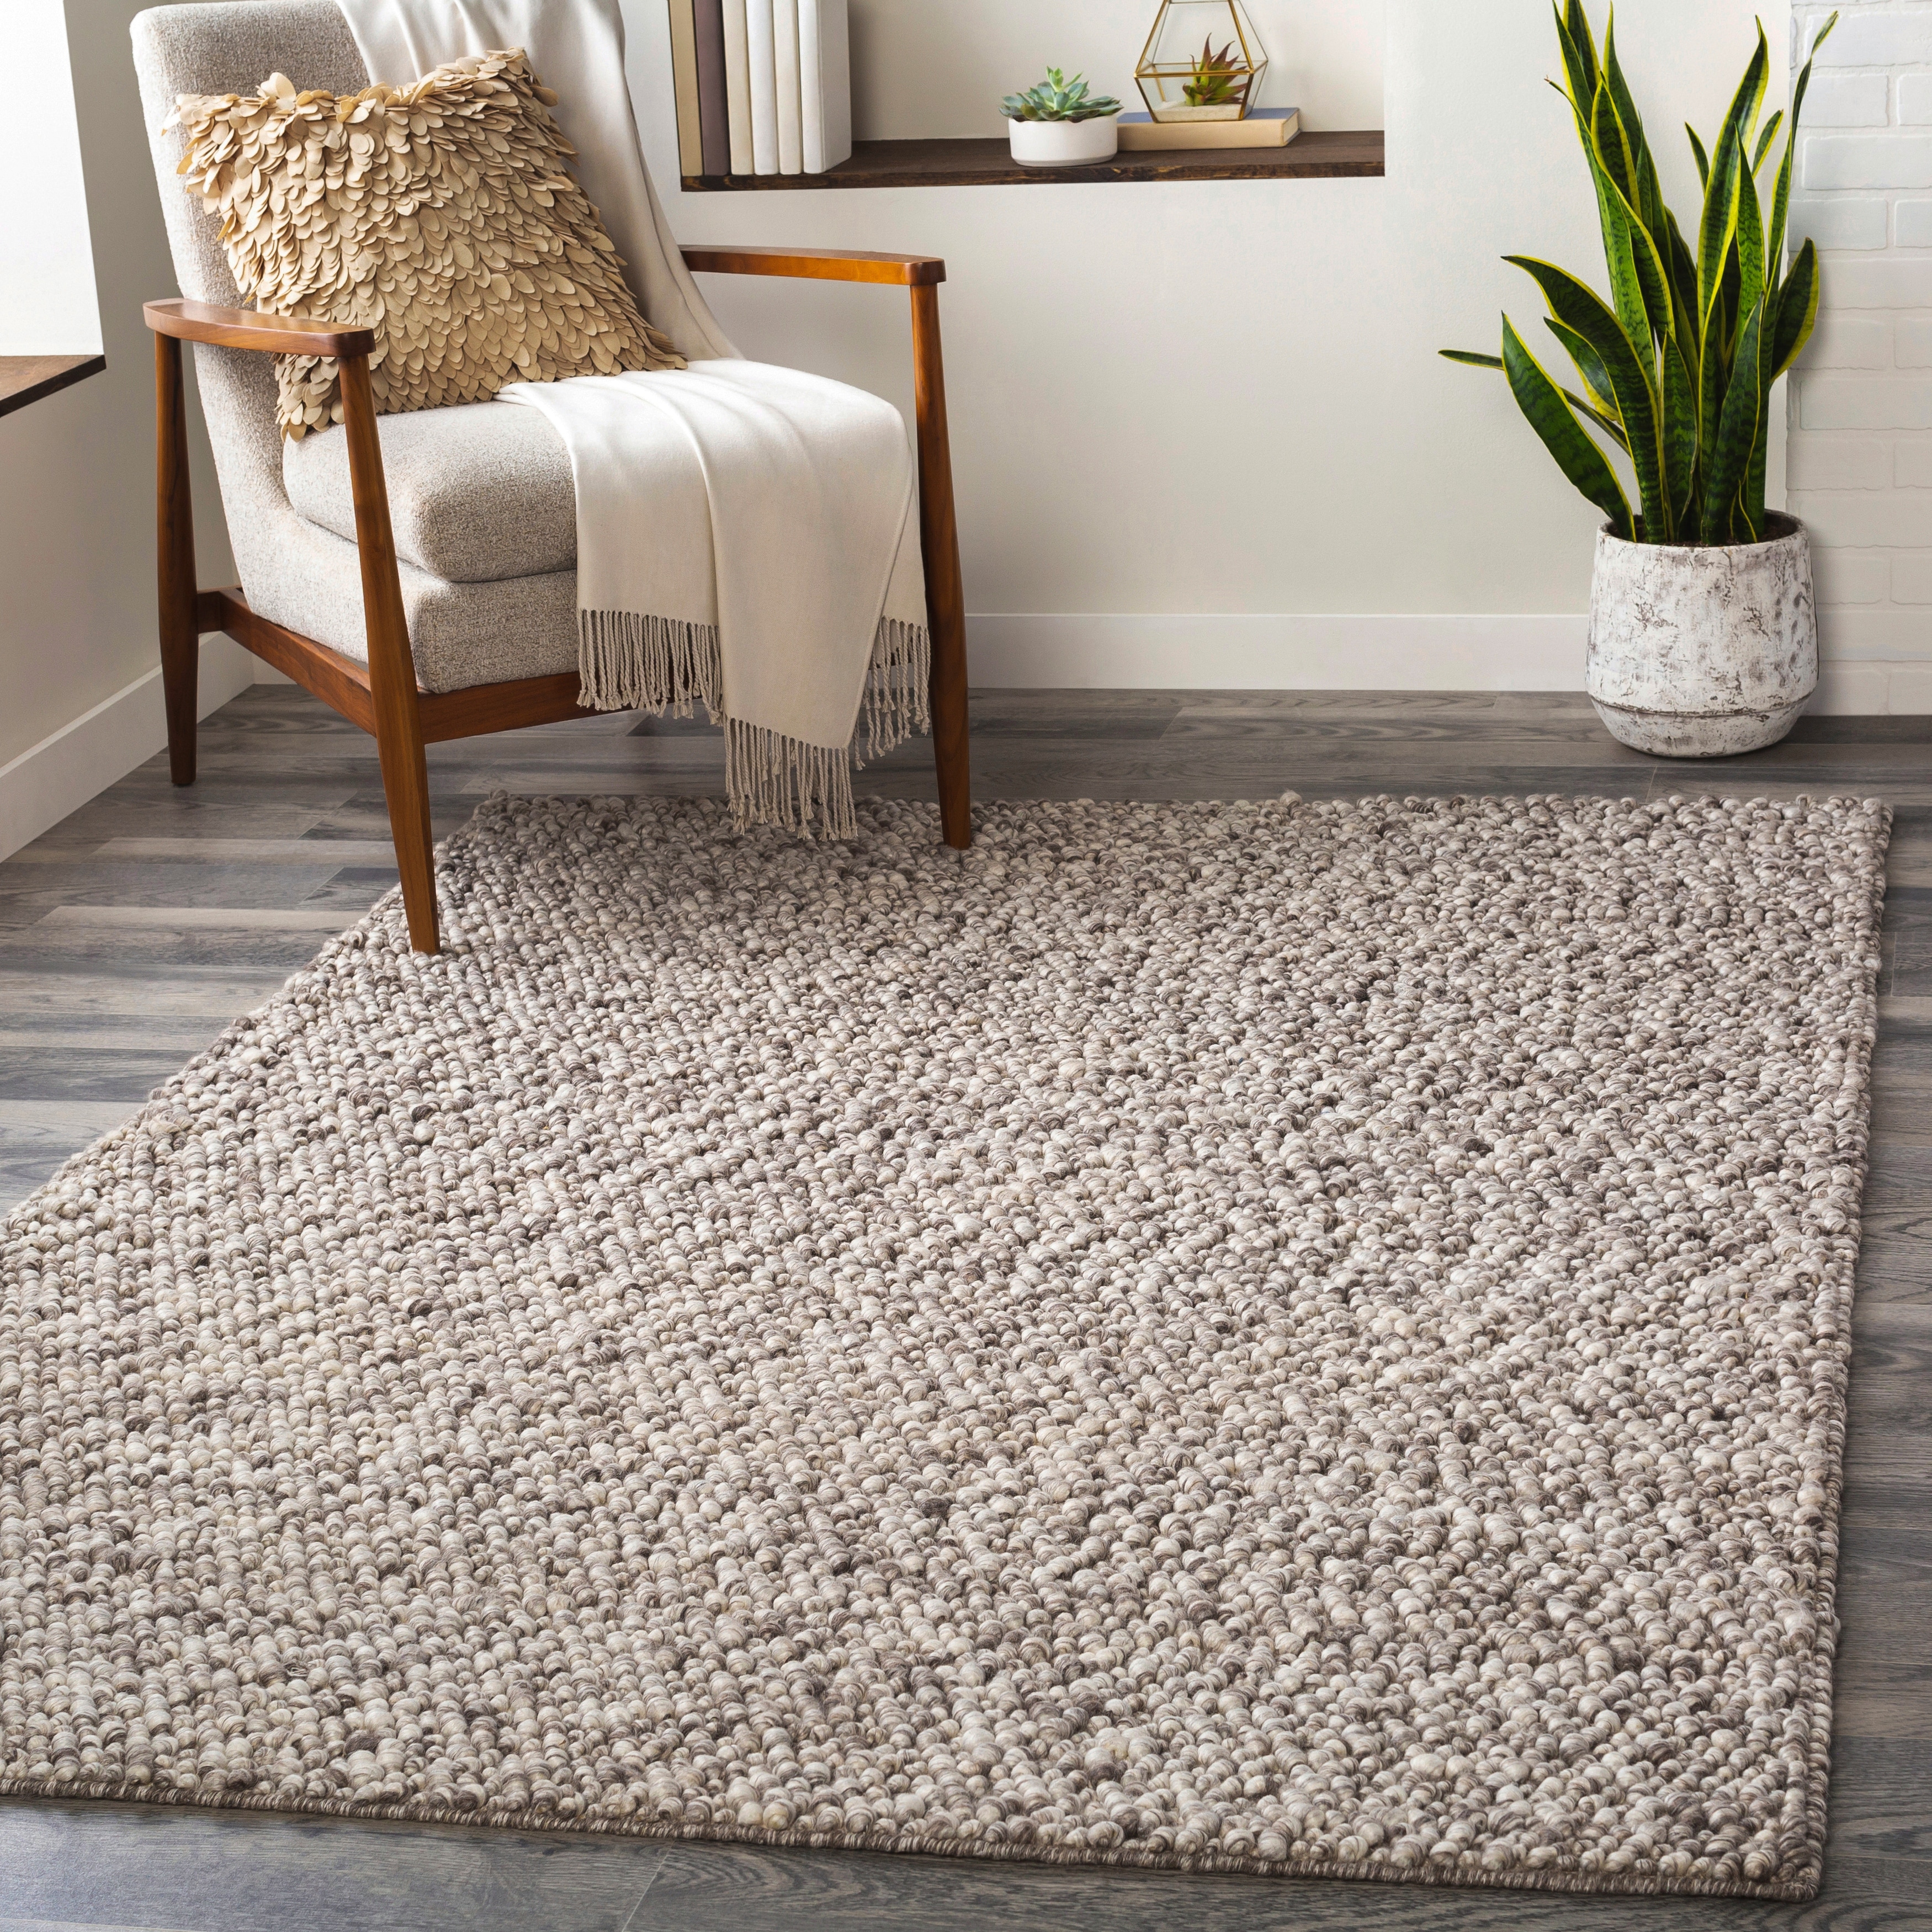 https://ak1.ostkcdn.com/images/products/is/images/direct/ddb3a6553c9421a2c8634cc2b486c71280390556/Nora-Handmade-Wool-Blend-Farmhouse-Area-Rug.jpg